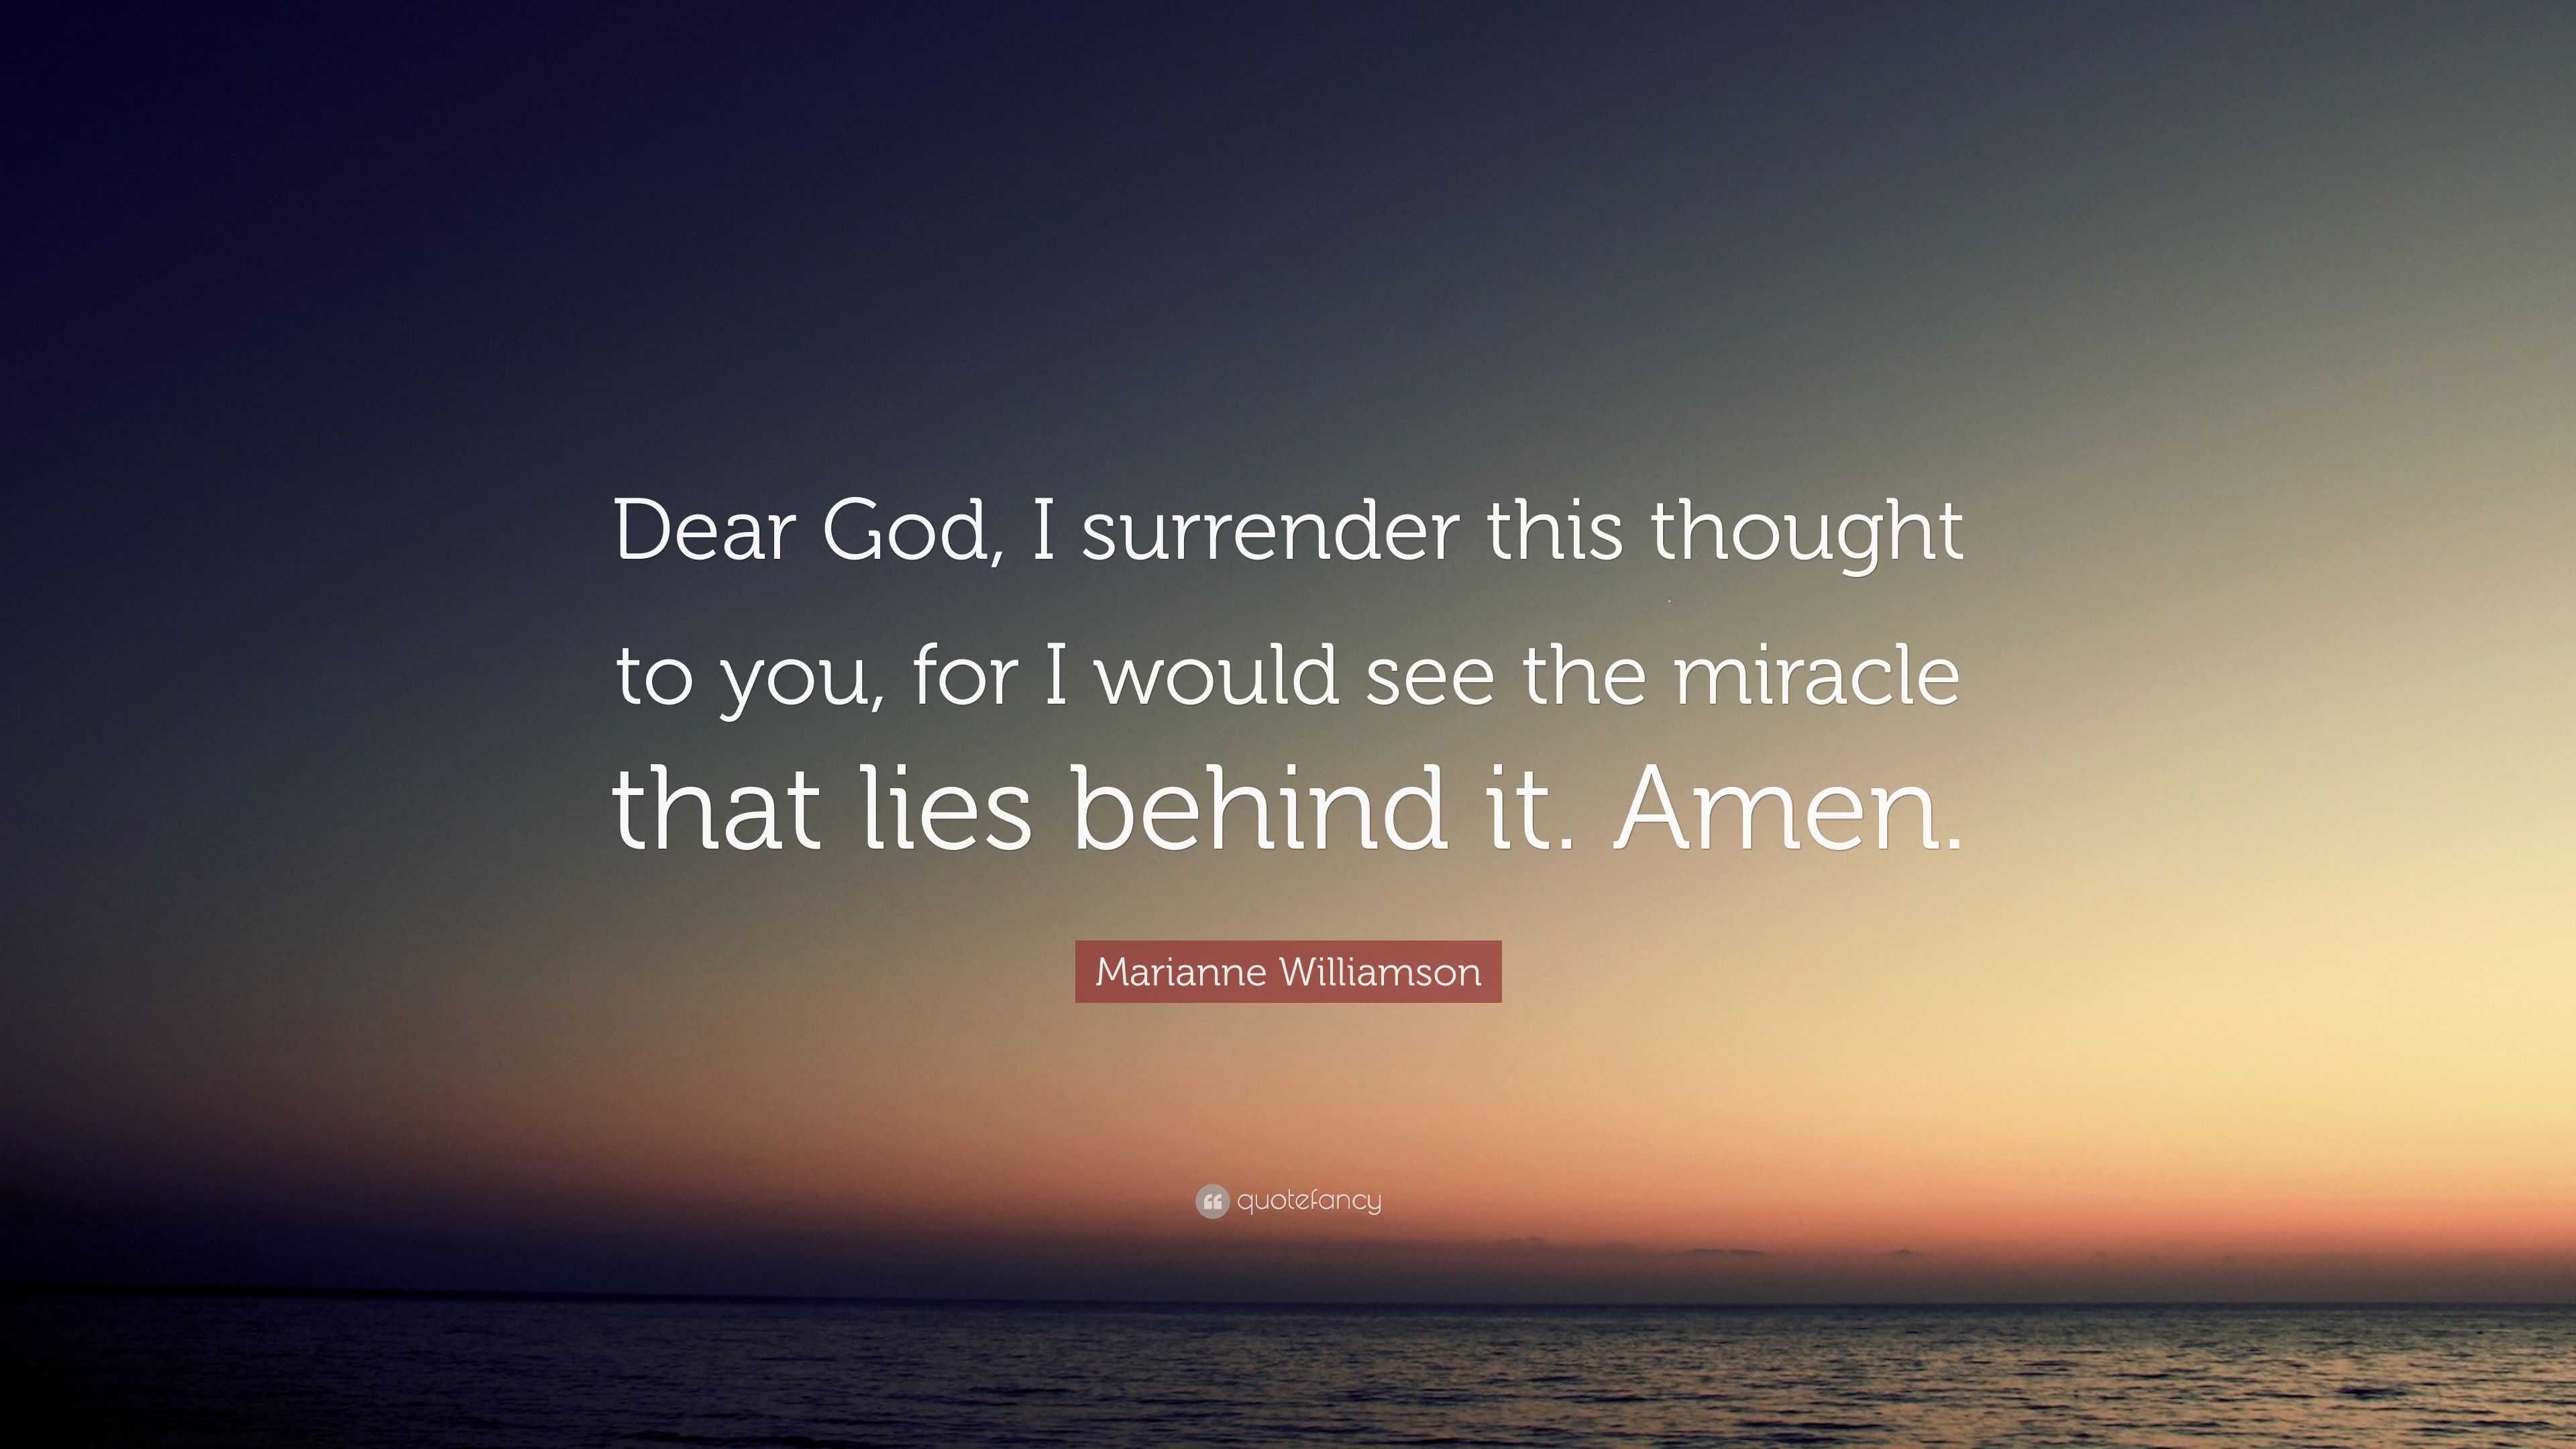 Marianne Williamson Quote: “Dear God, I surrender this thought to you ...